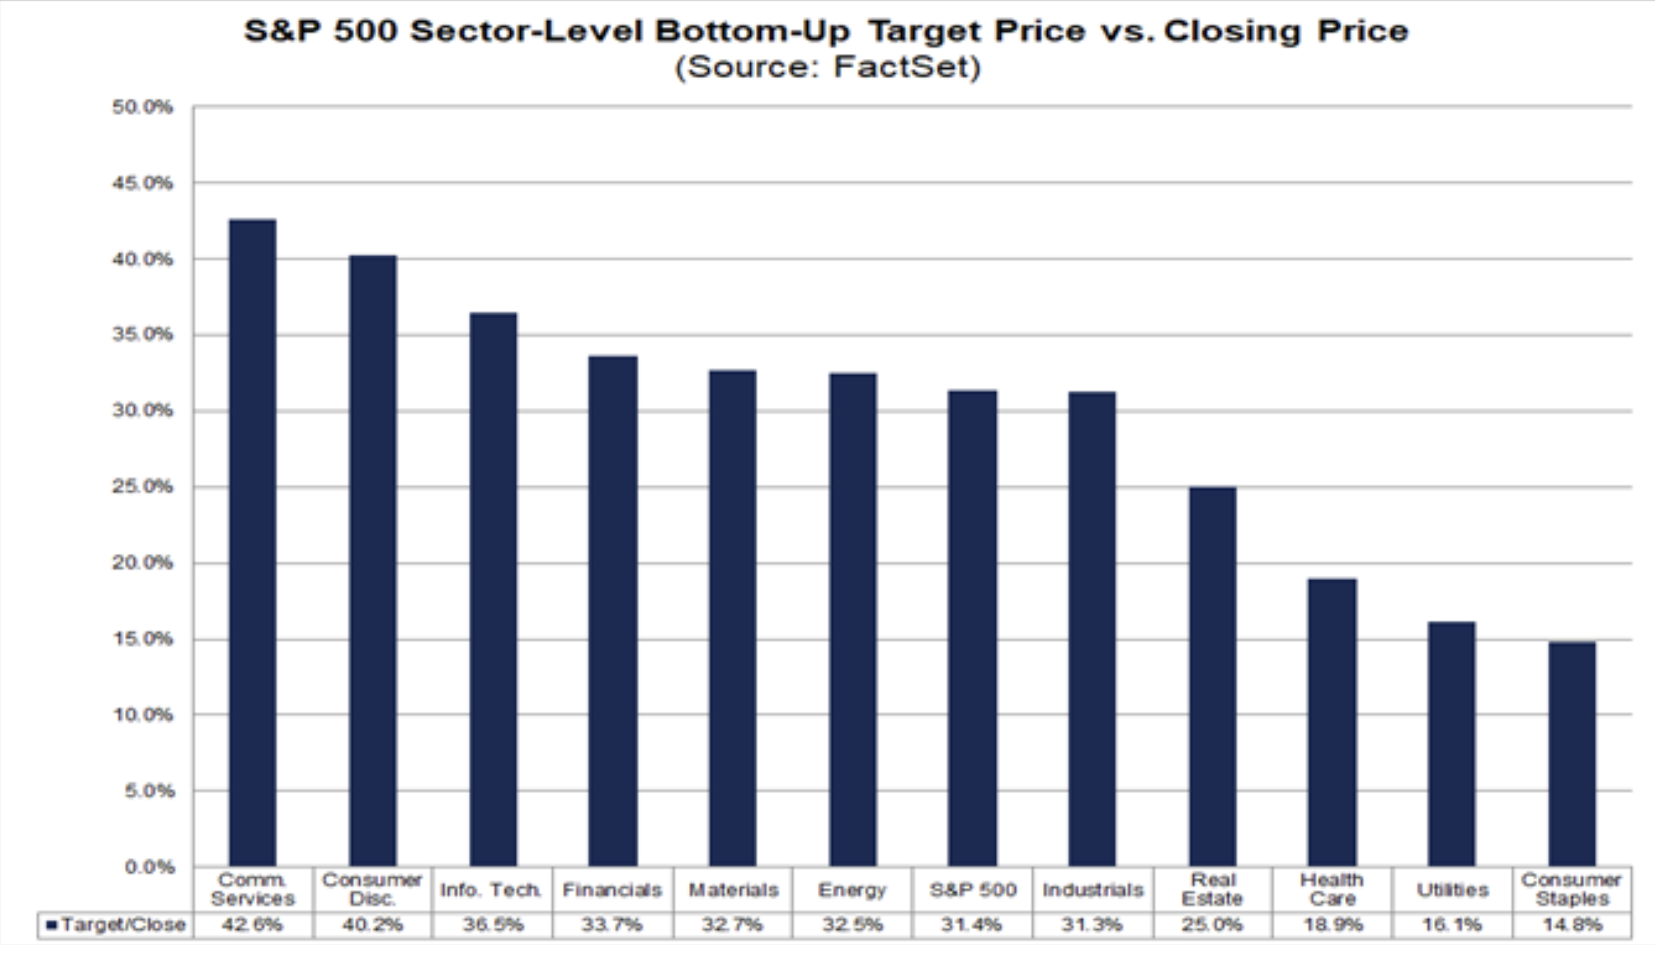 S&P 500 Sector-Level Bottom-Up Target Price vs Closing Price